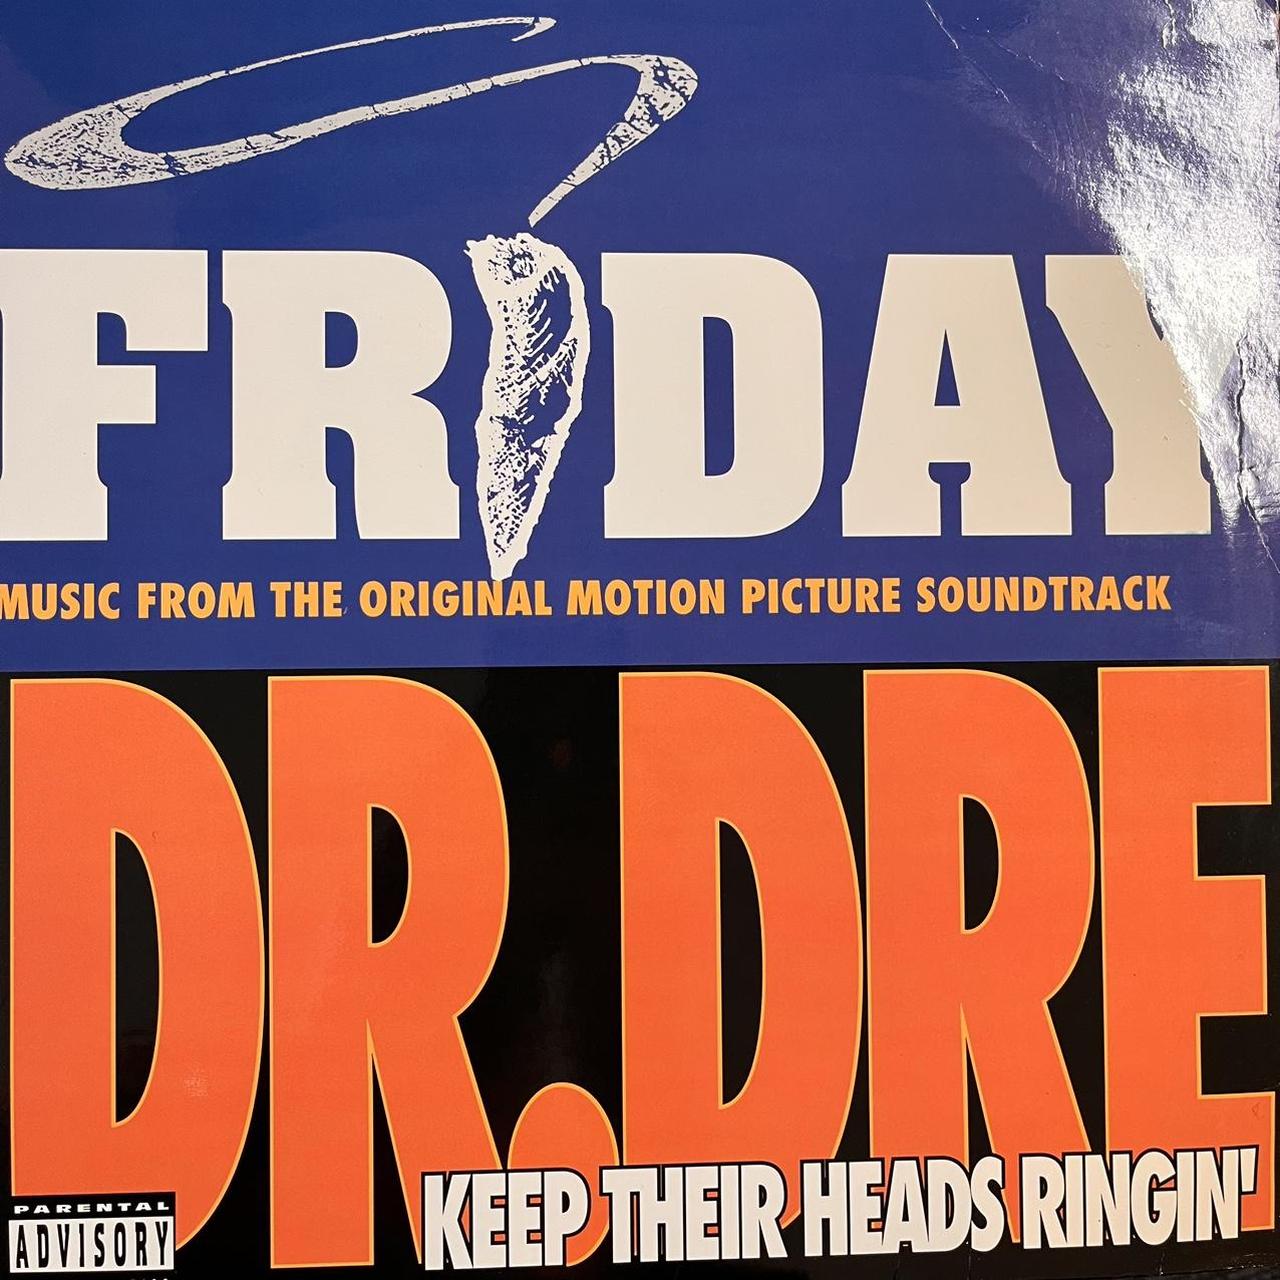 Dr Dre “Keep Their Heads Ringing’” / Mack 10 “Take A Hit” 4 track 12inch Vinyl